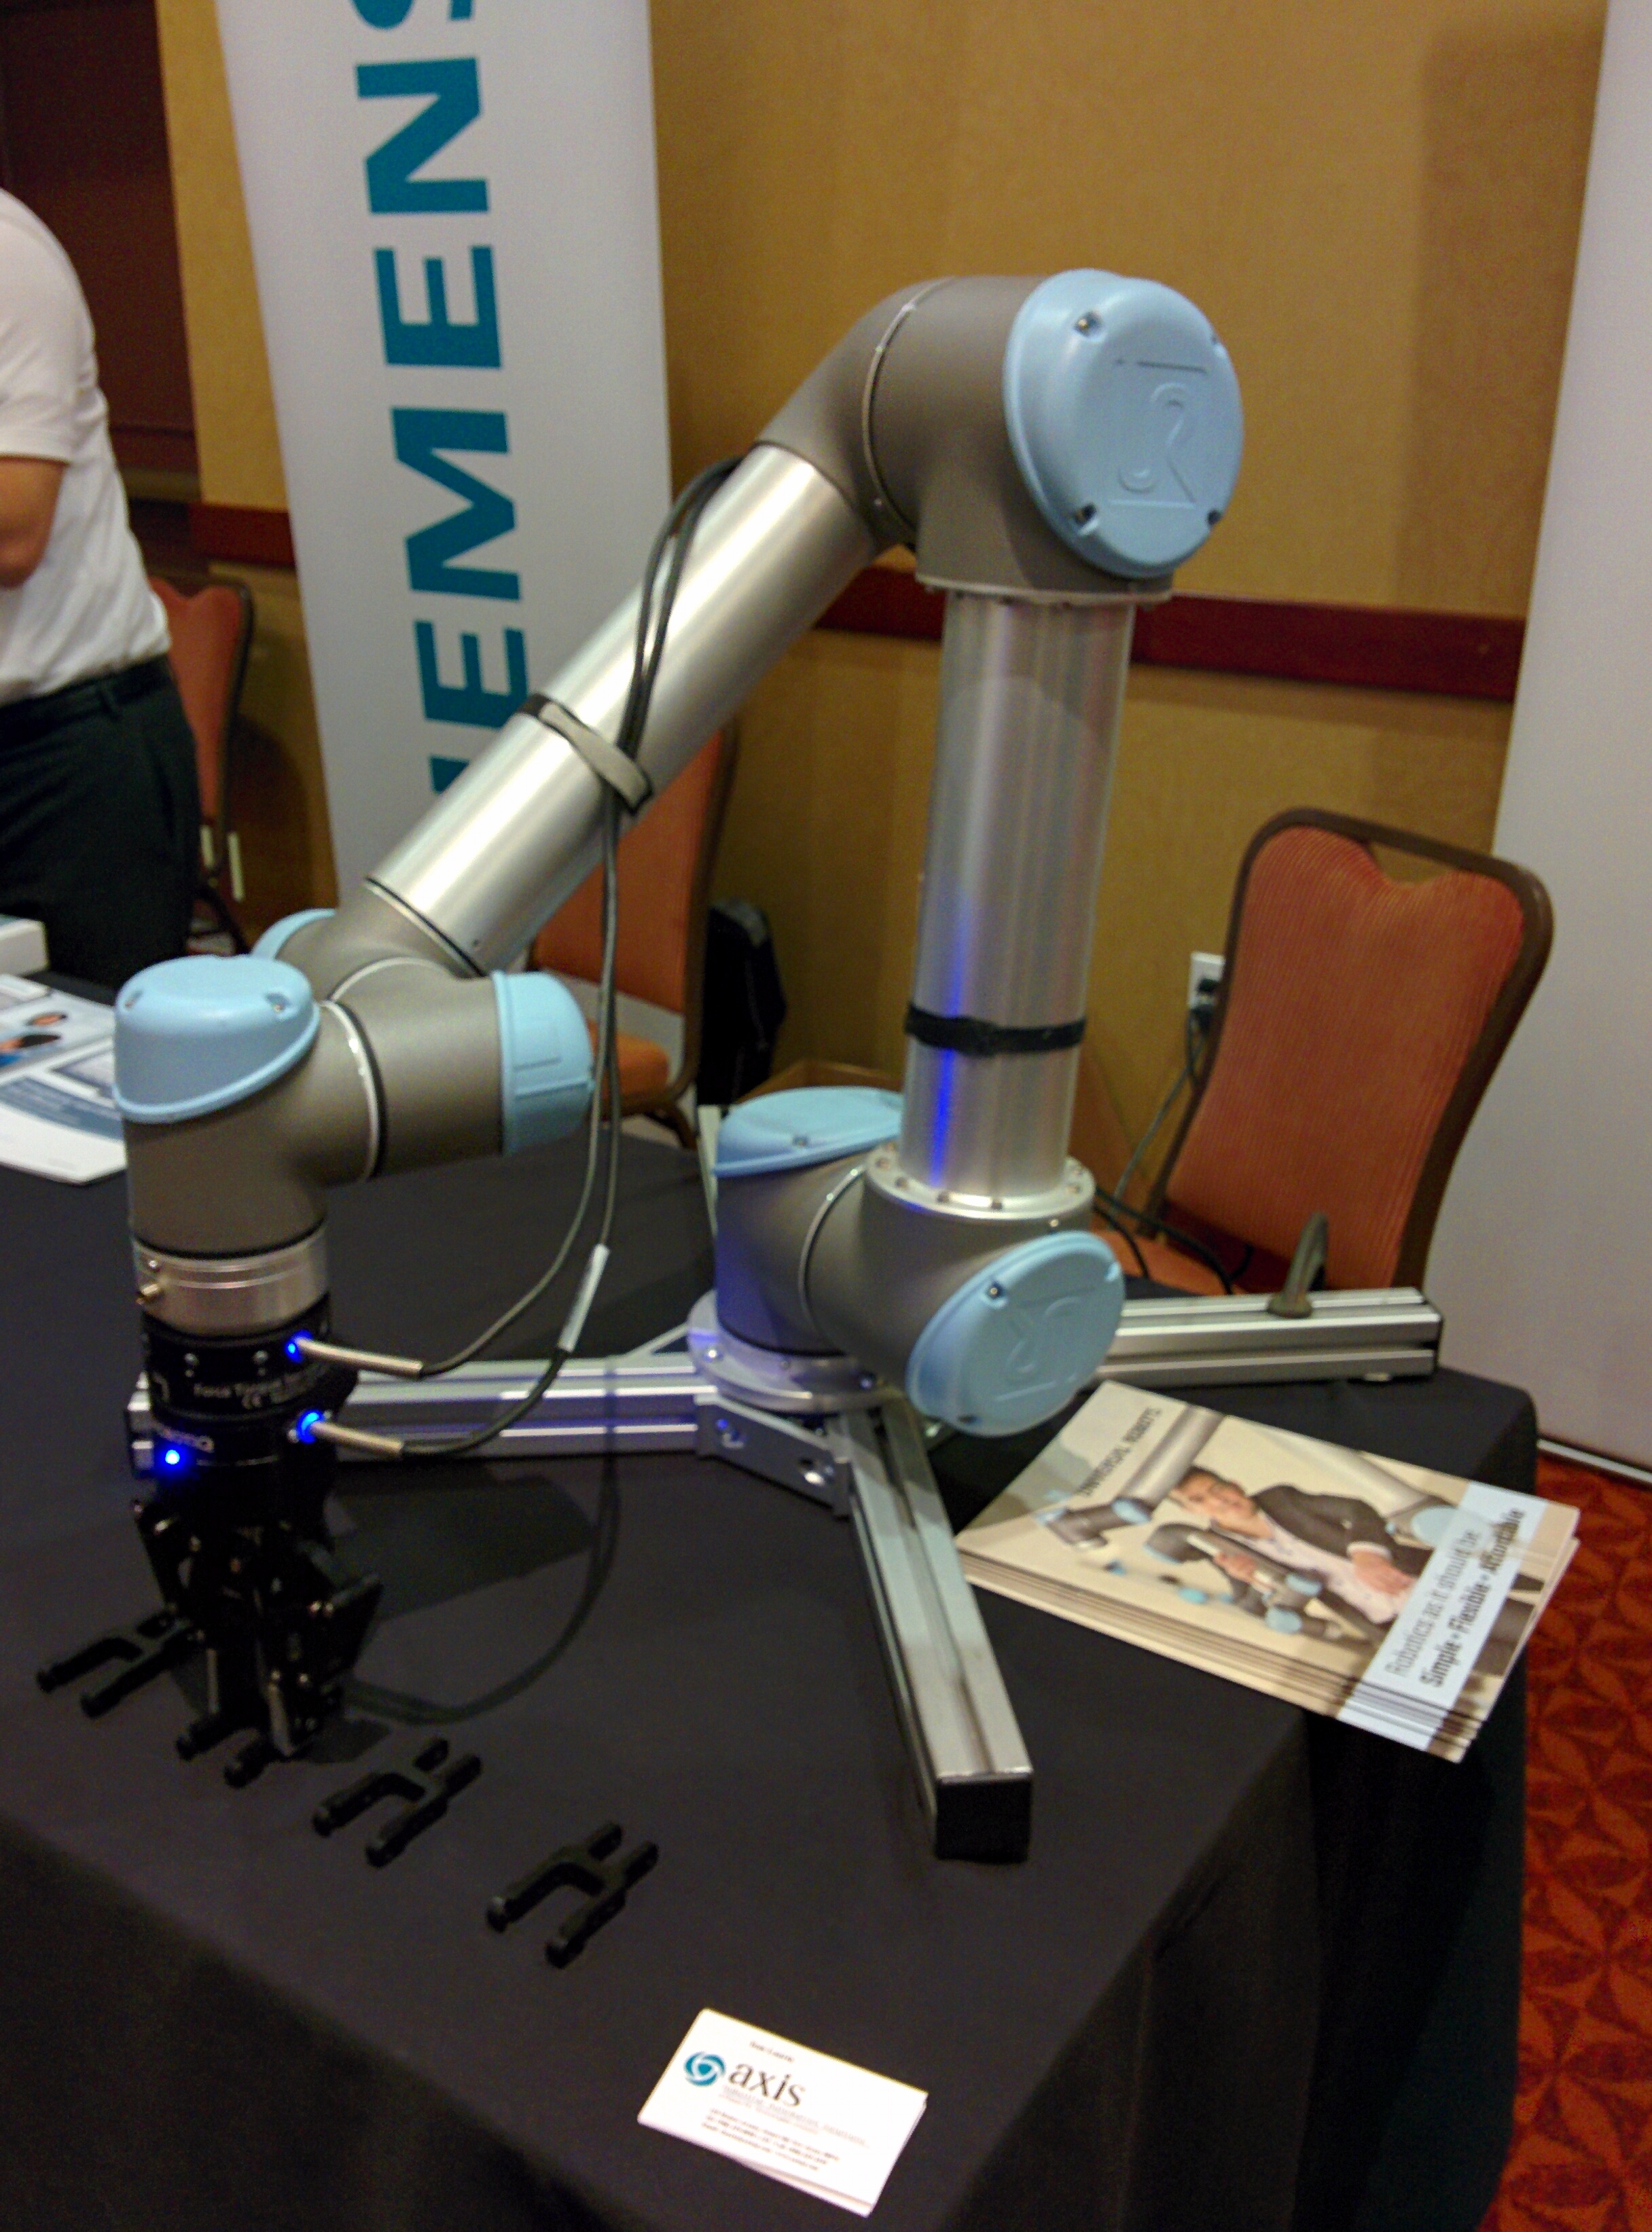 A Universal Robots cobot arm on display at the New York Automation and Robotics Conference 2017.